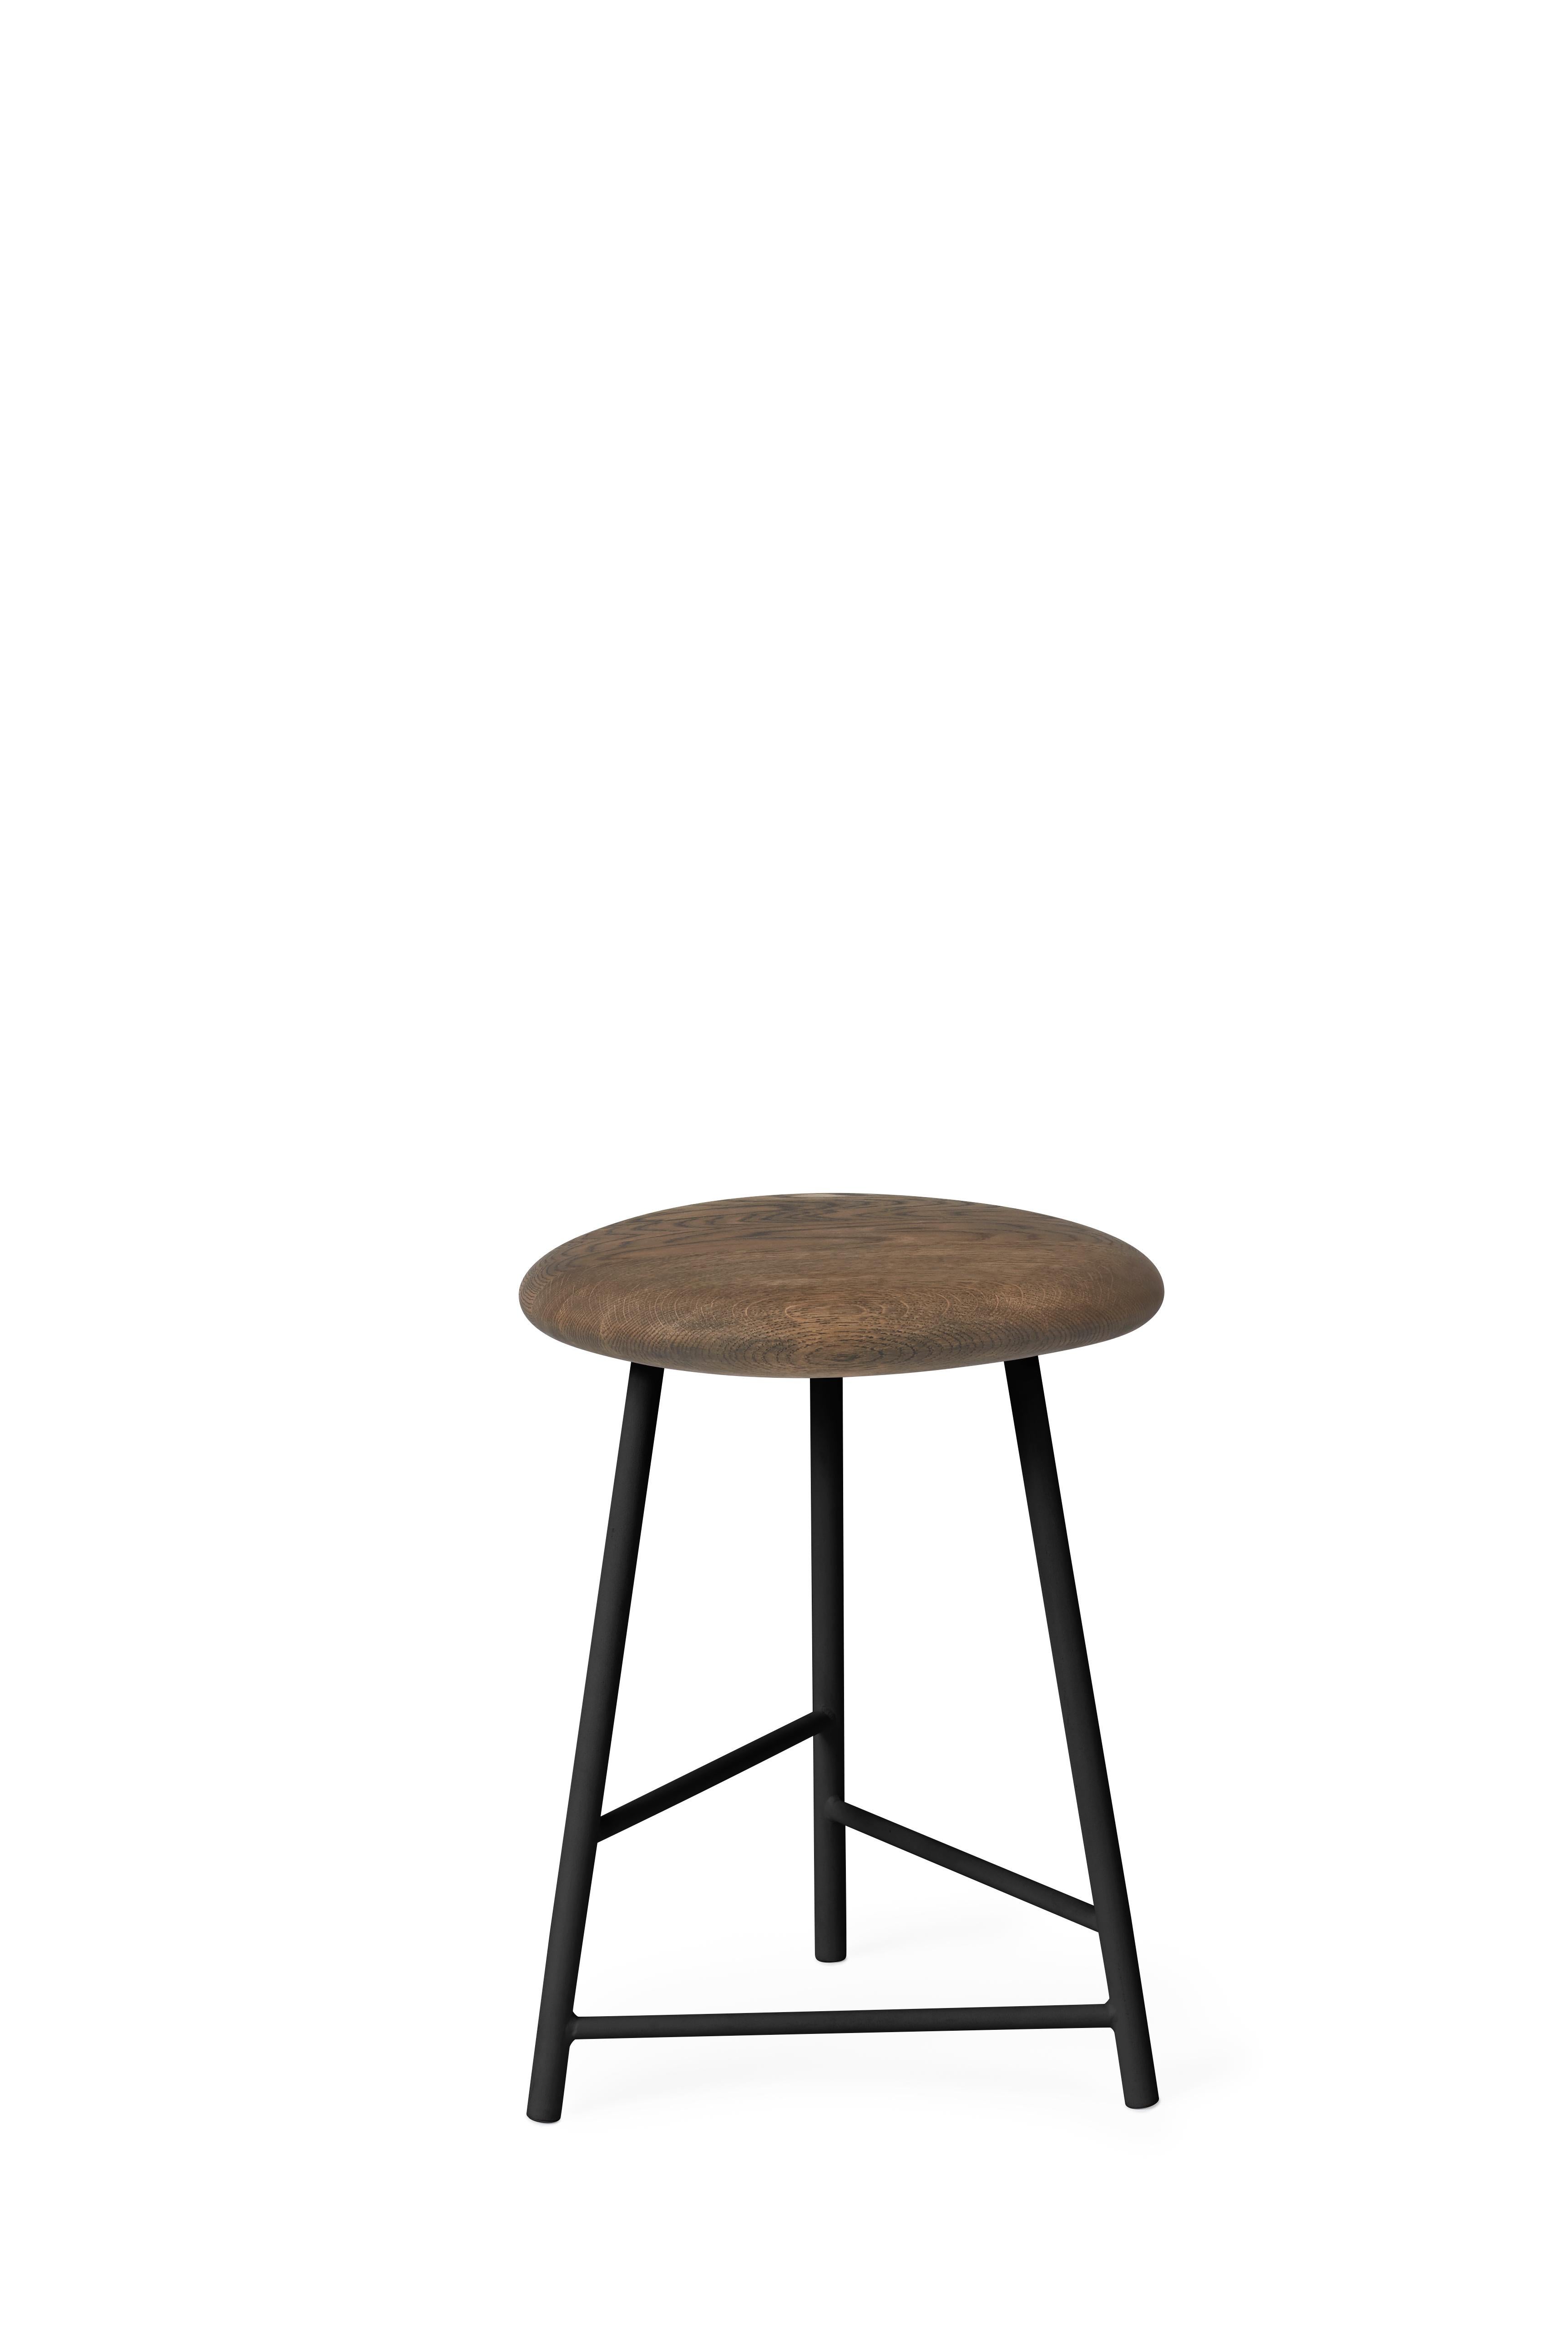 For Sale: Black (Smoked Oak/Black Noir) Pebble Stool, by Welling / Ludvik from Warm Nordic